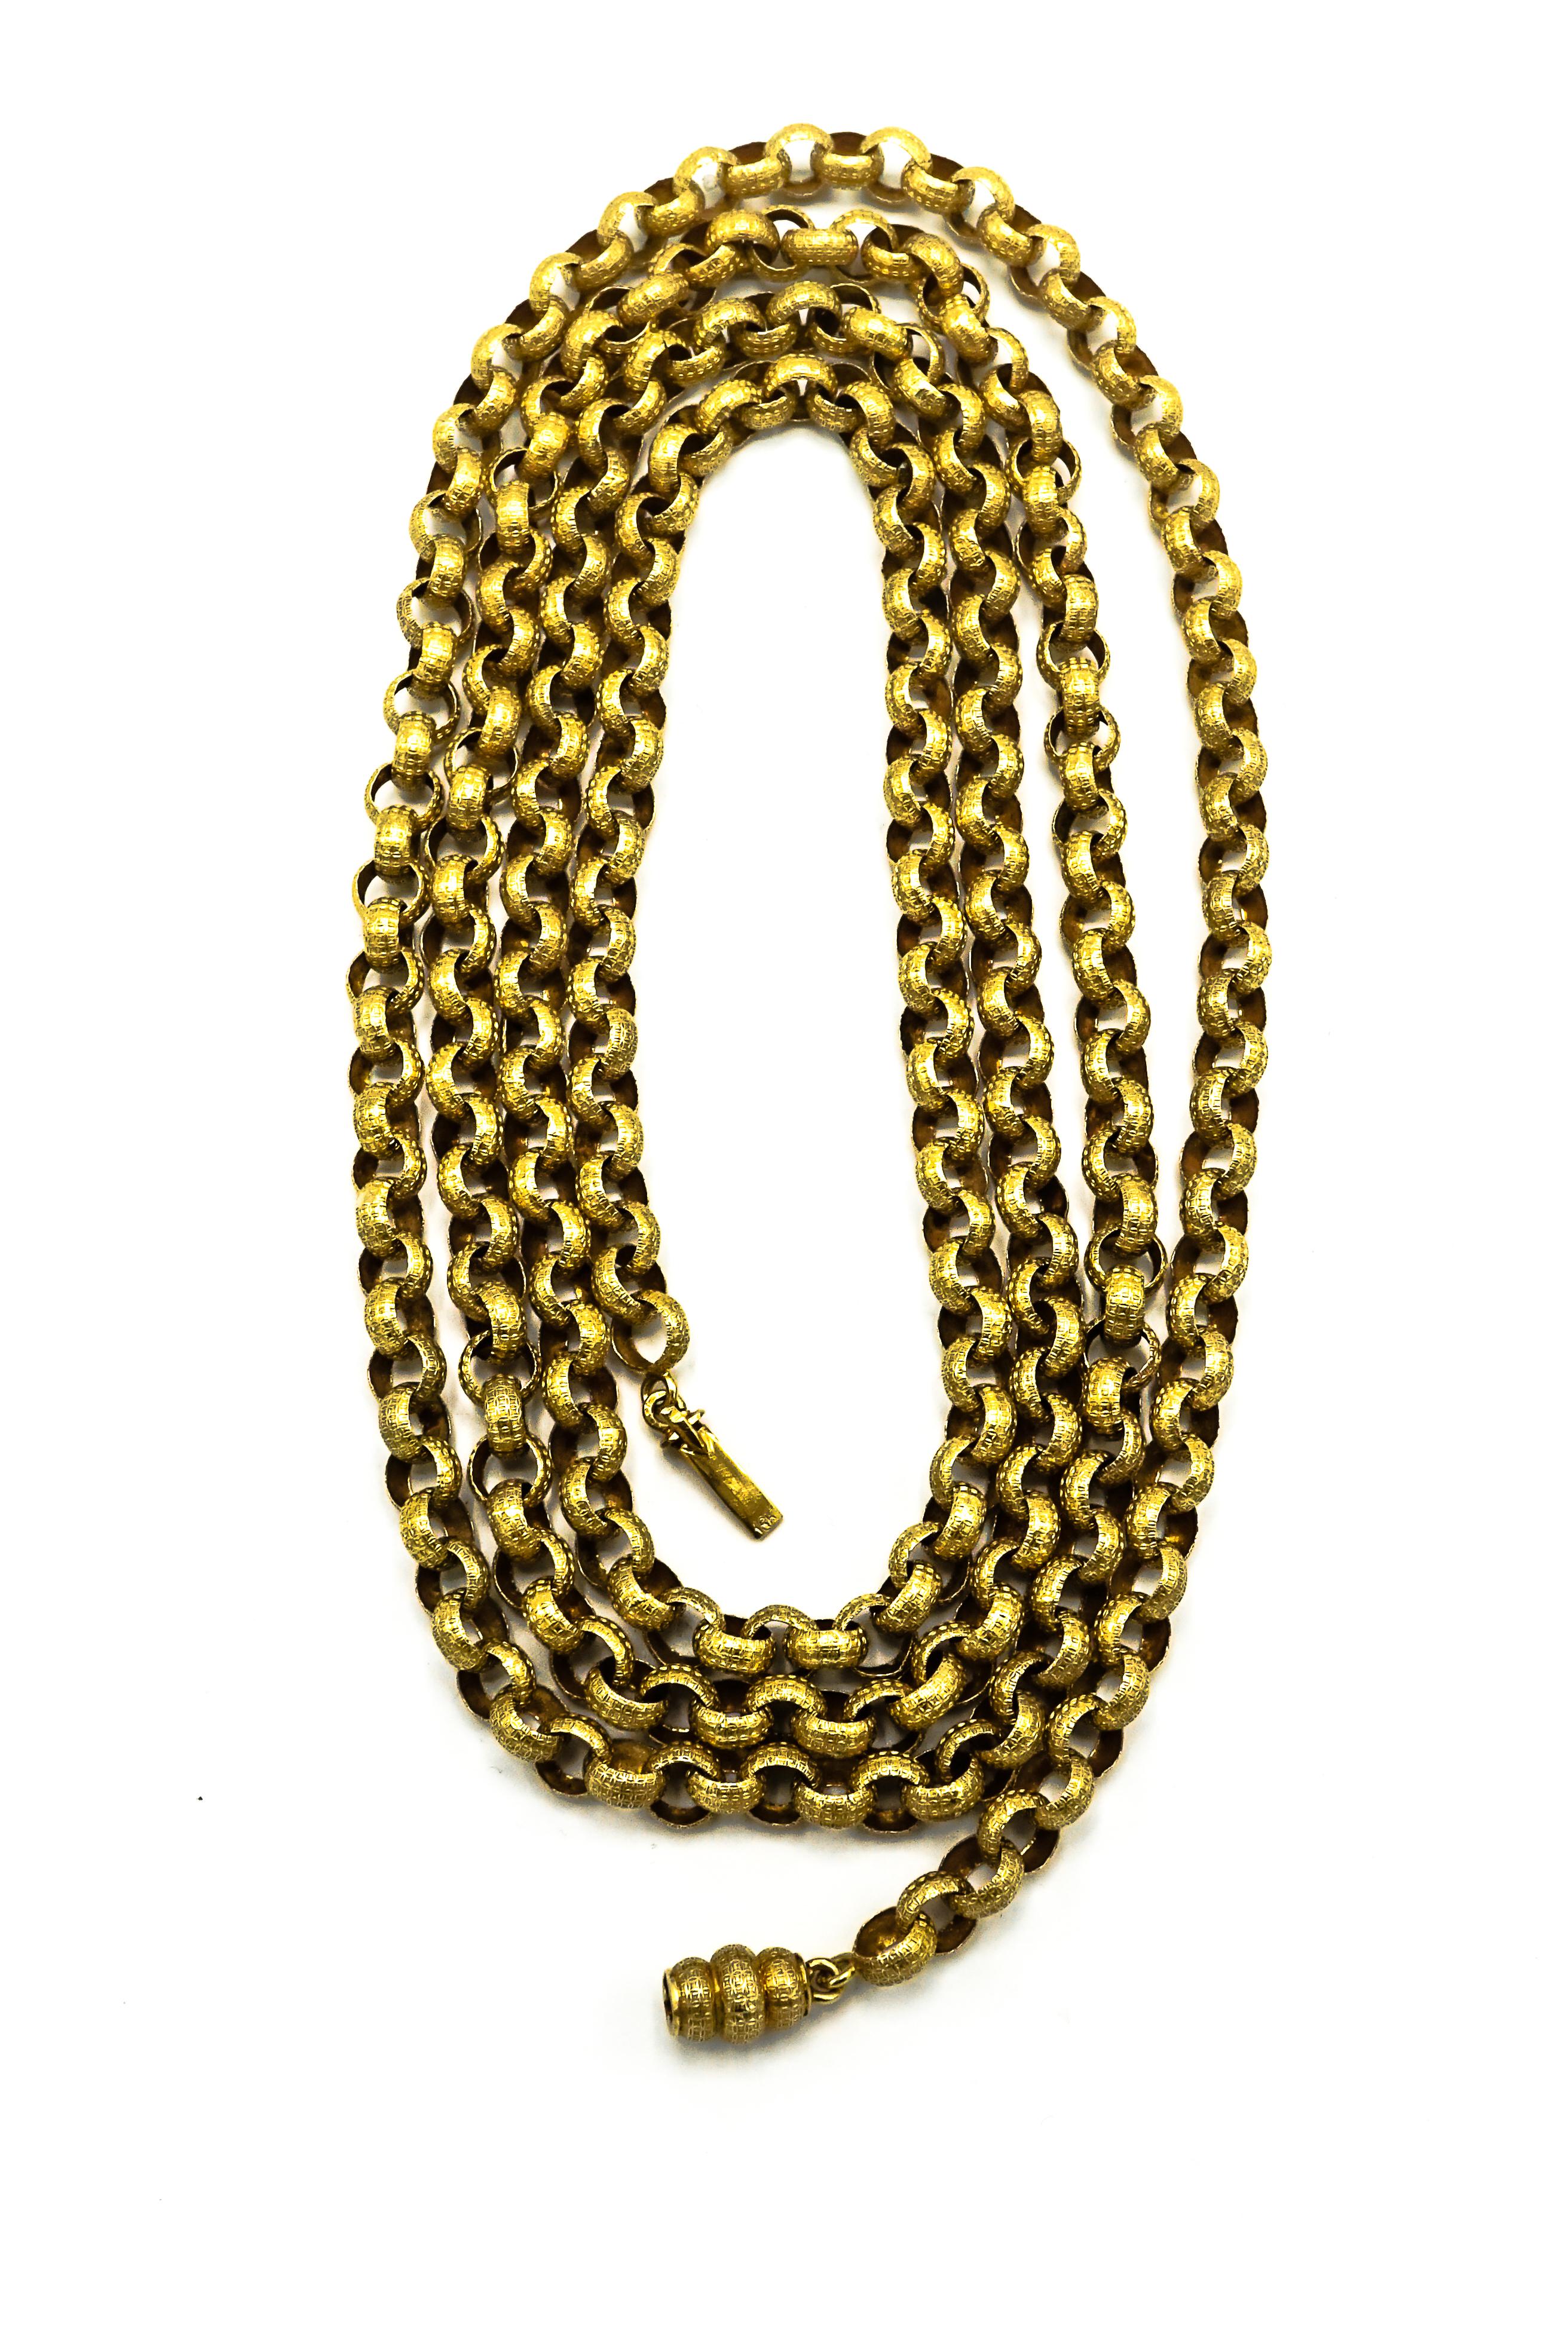 Victorian 15K Gold Extended Chain/Necklace from 1880's 

SKU#N-01720